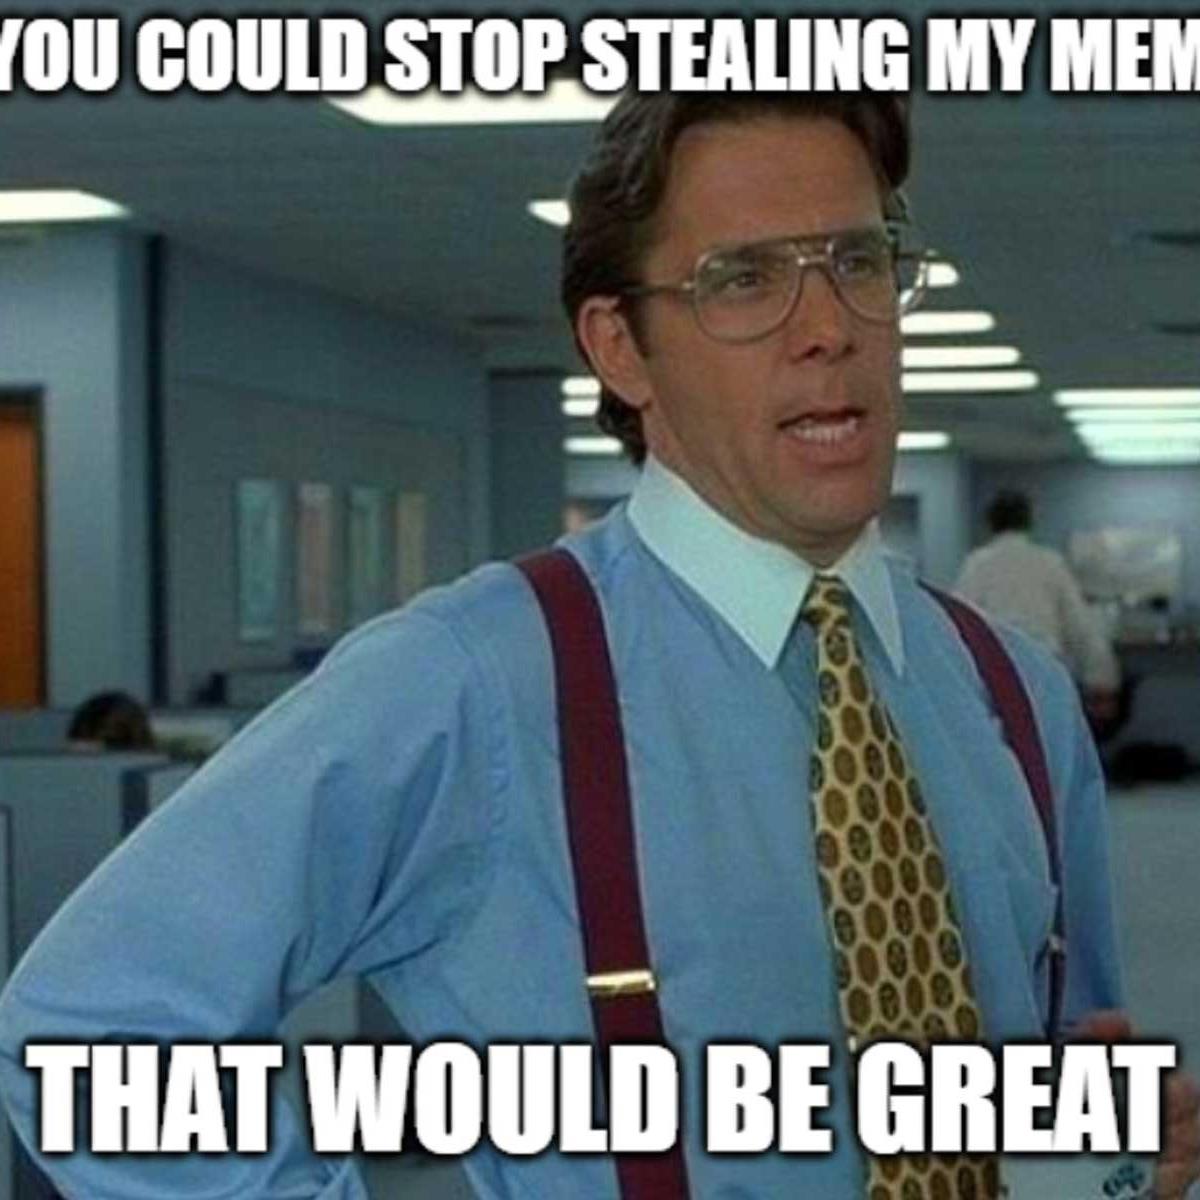 Imgflip's AI-Powered Meme Generator Is The Perfect Distraction